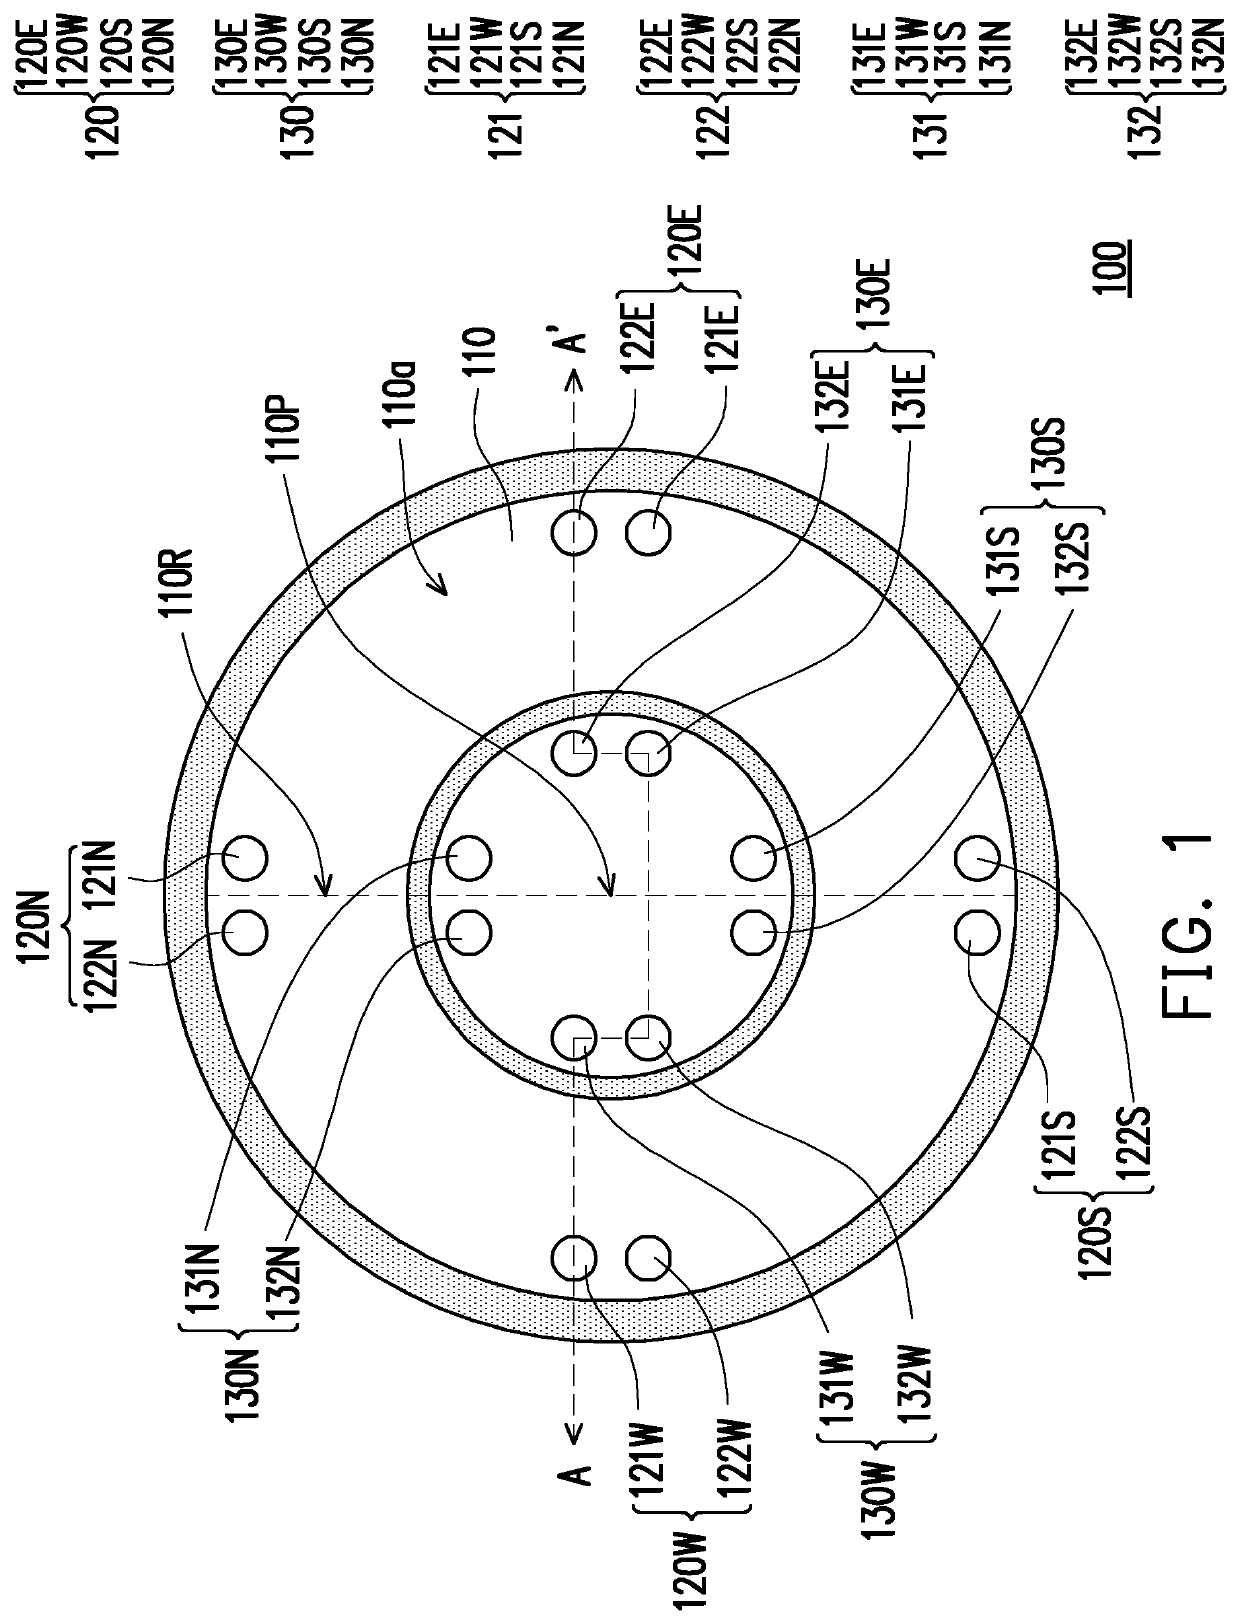 Wafer chuck apparatus, method for measuring wafer bow value and semiconductor process flow